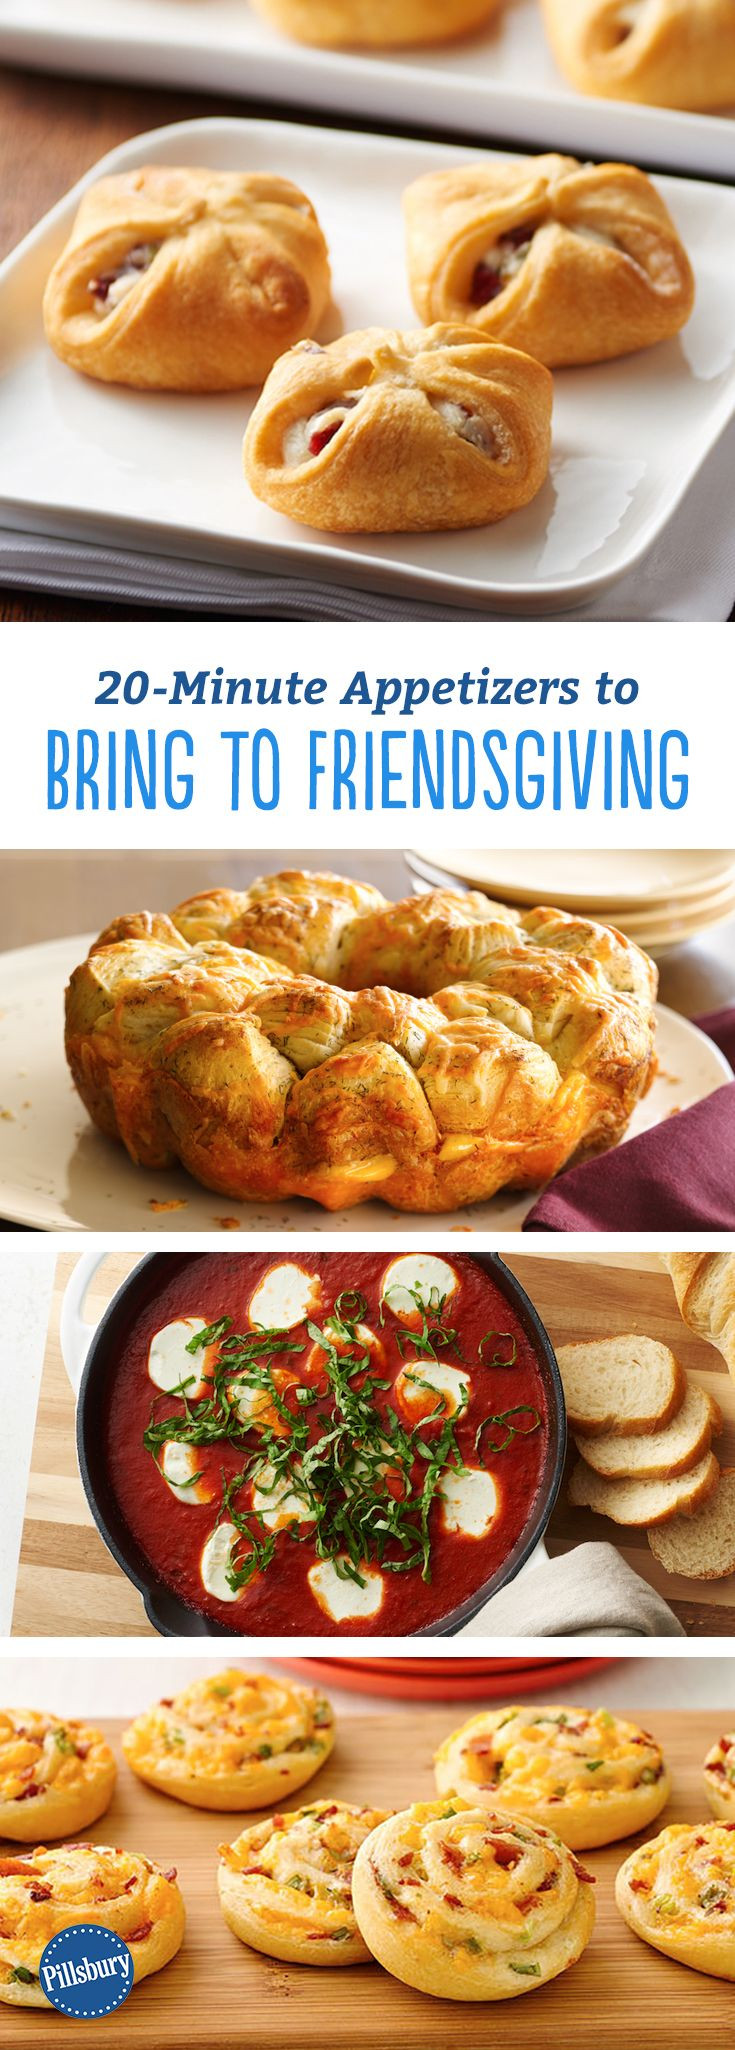 Appetizers For Thanksgiving Dinner
 20 Minute Appetizers to Bring to Friendsgiving